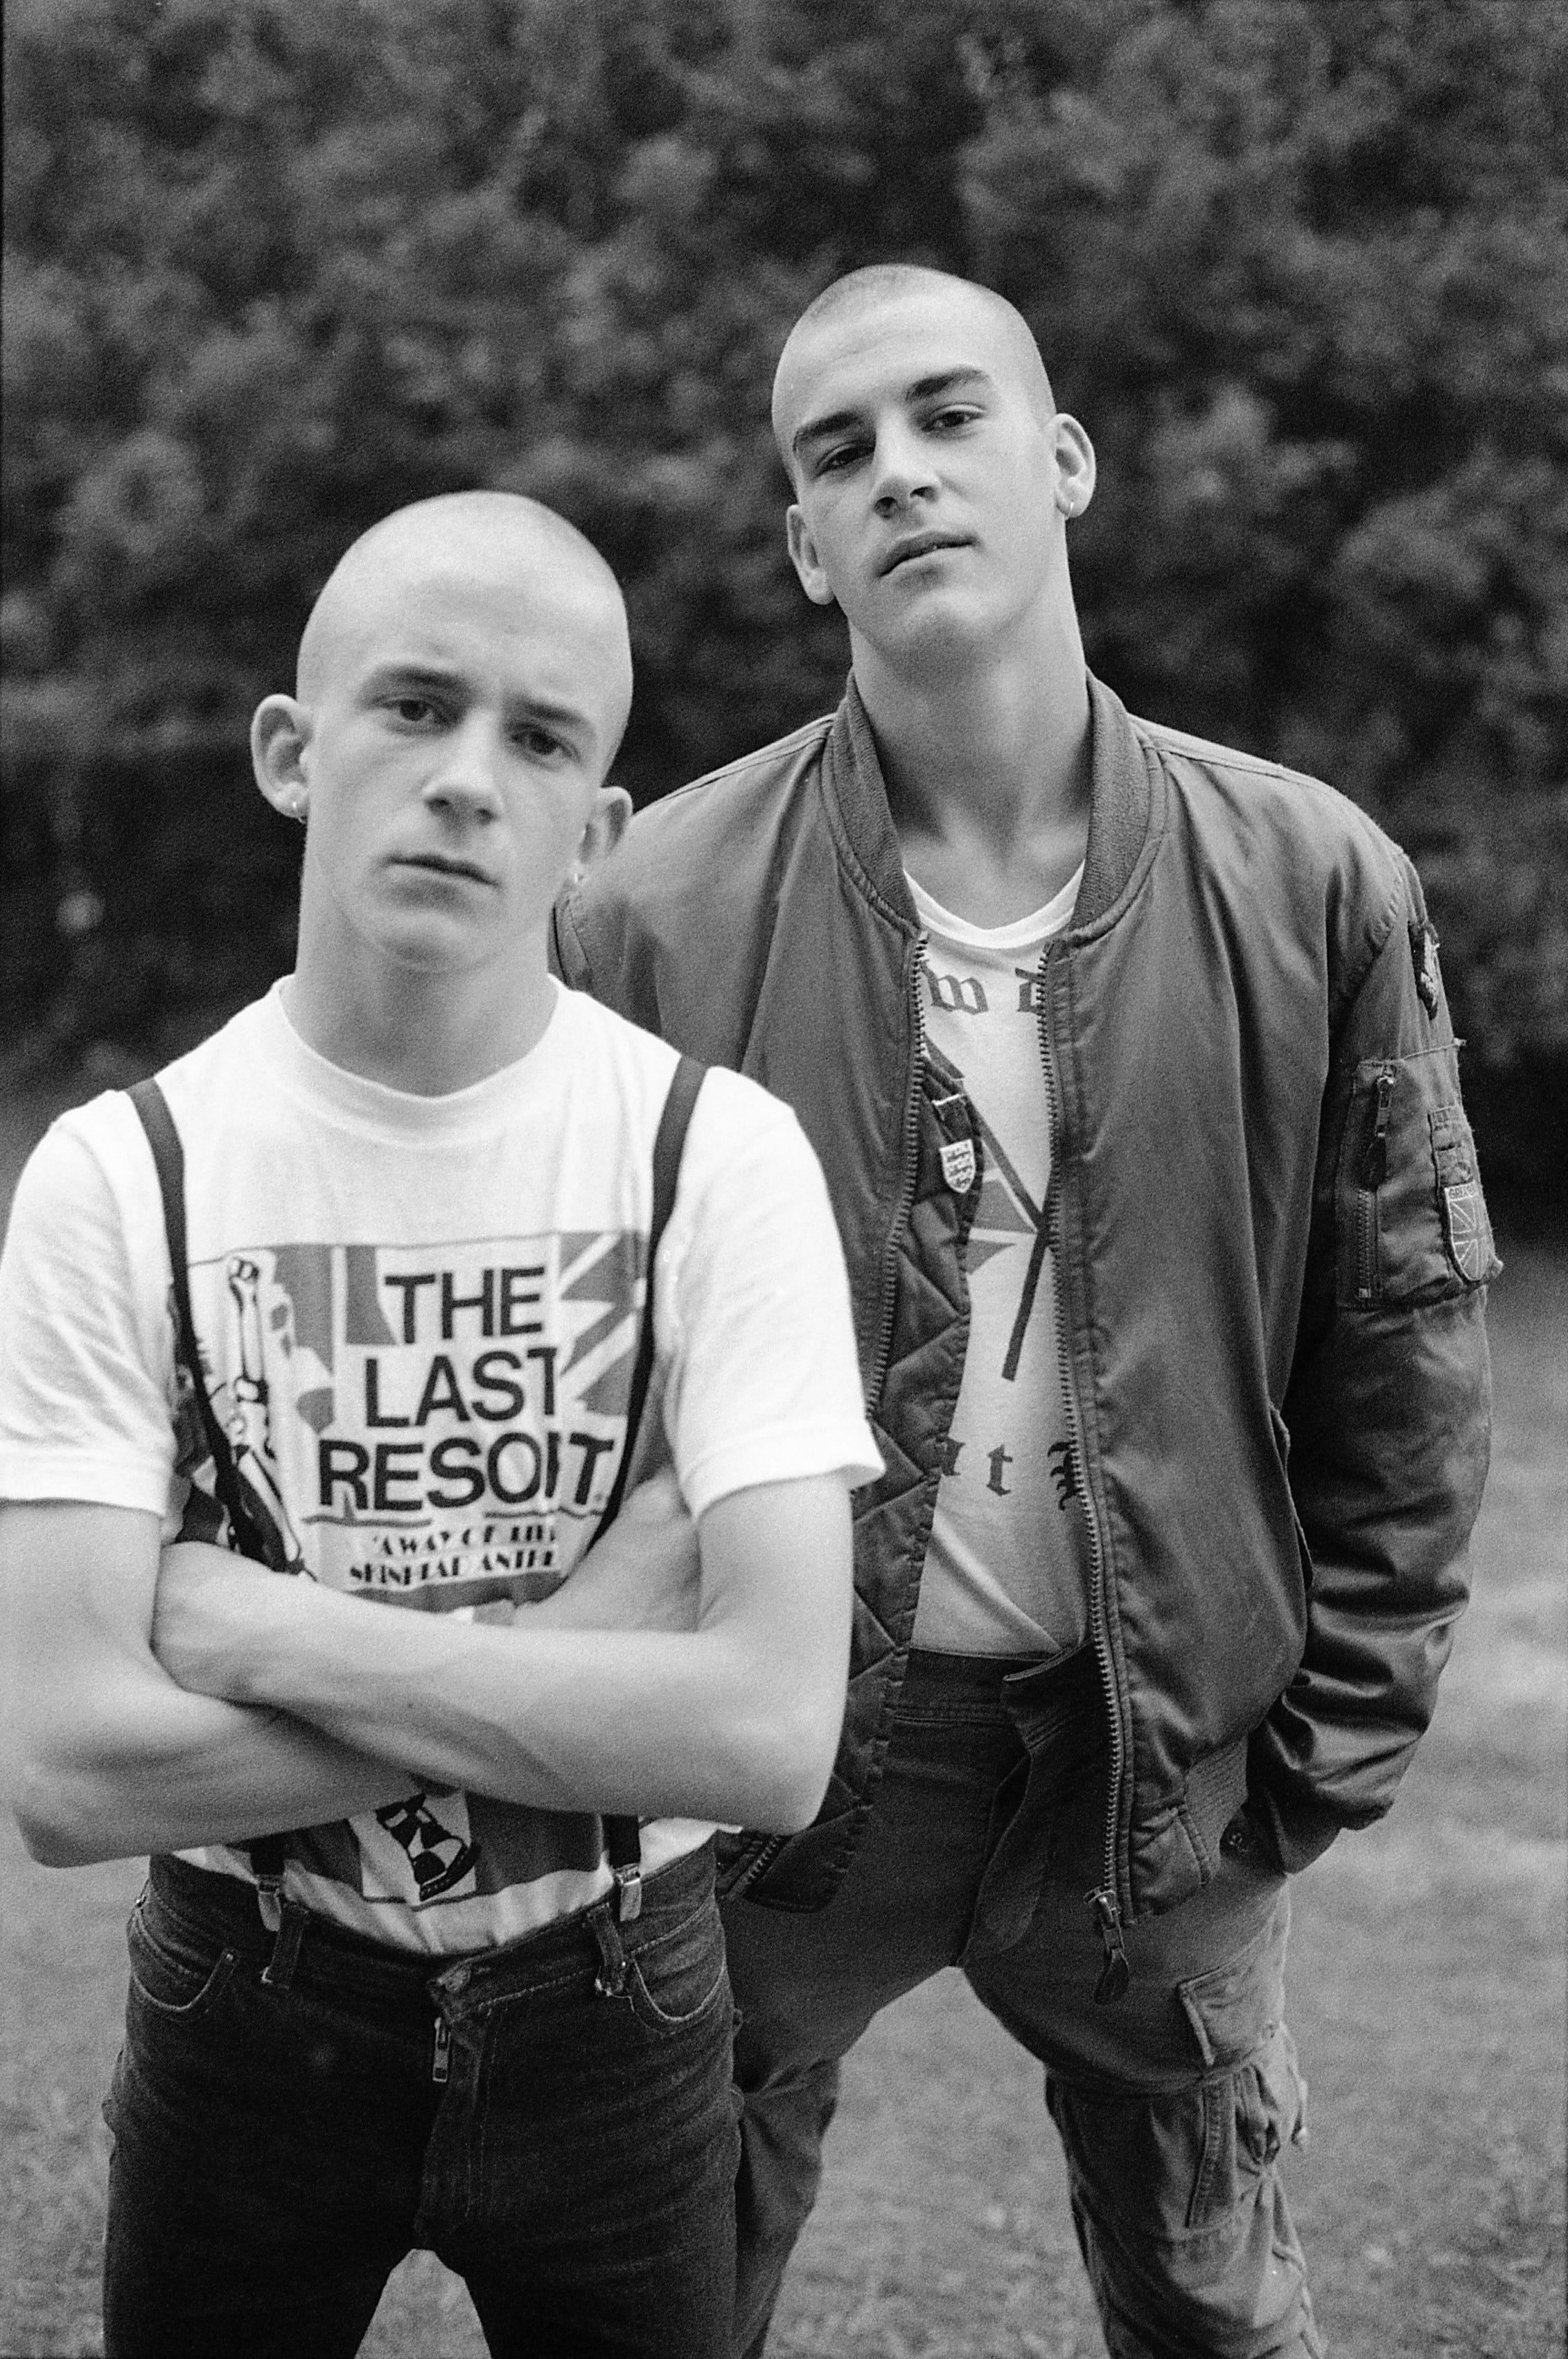 Photos: British skinheads in the 1980s were young, pissed, and ...